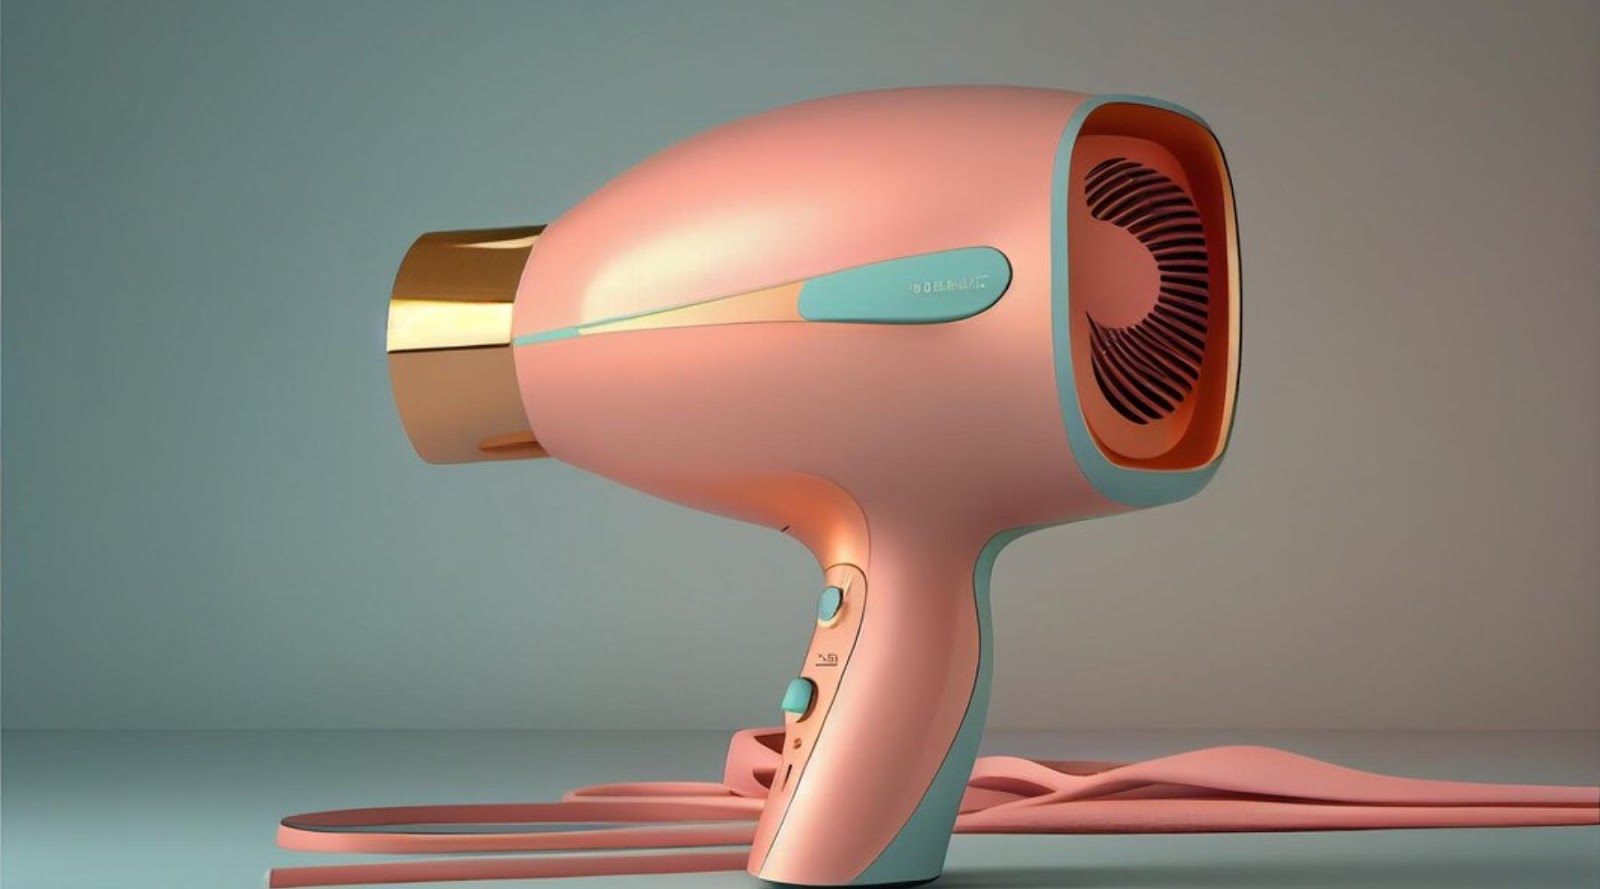 Key Features to Consider When Shopping for a Mini Travel Hair Dryer